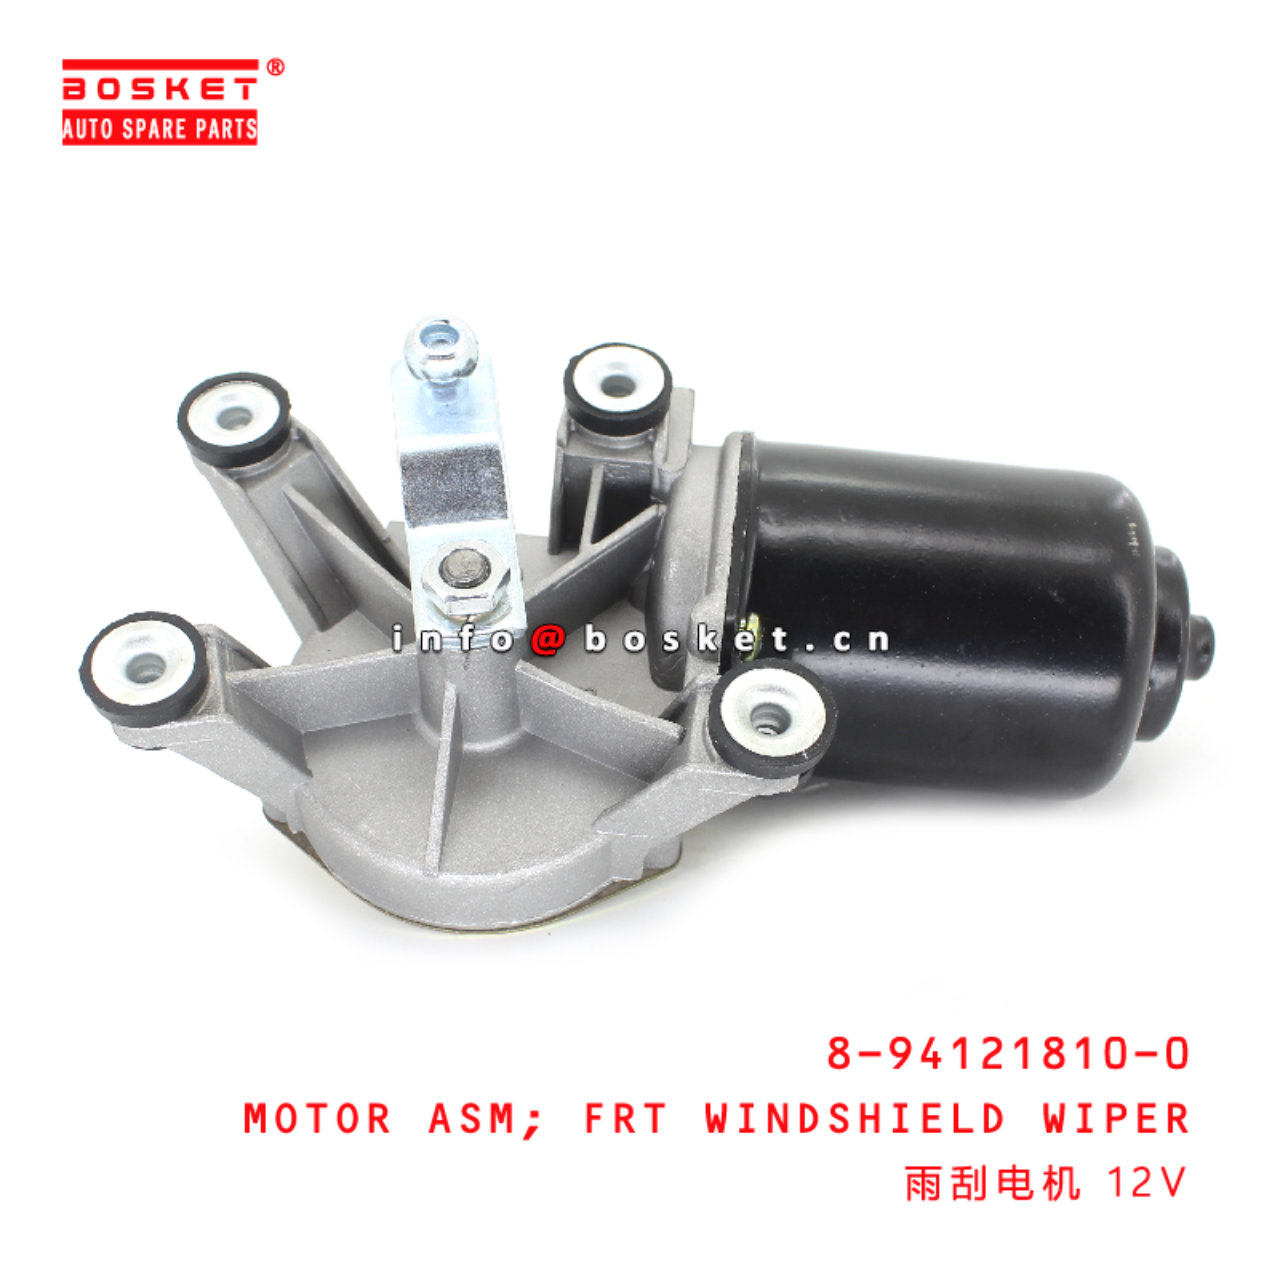 8-94121810-0 Front Windshield Wiper Motor Assembly suitable for ISUZU  8941218100